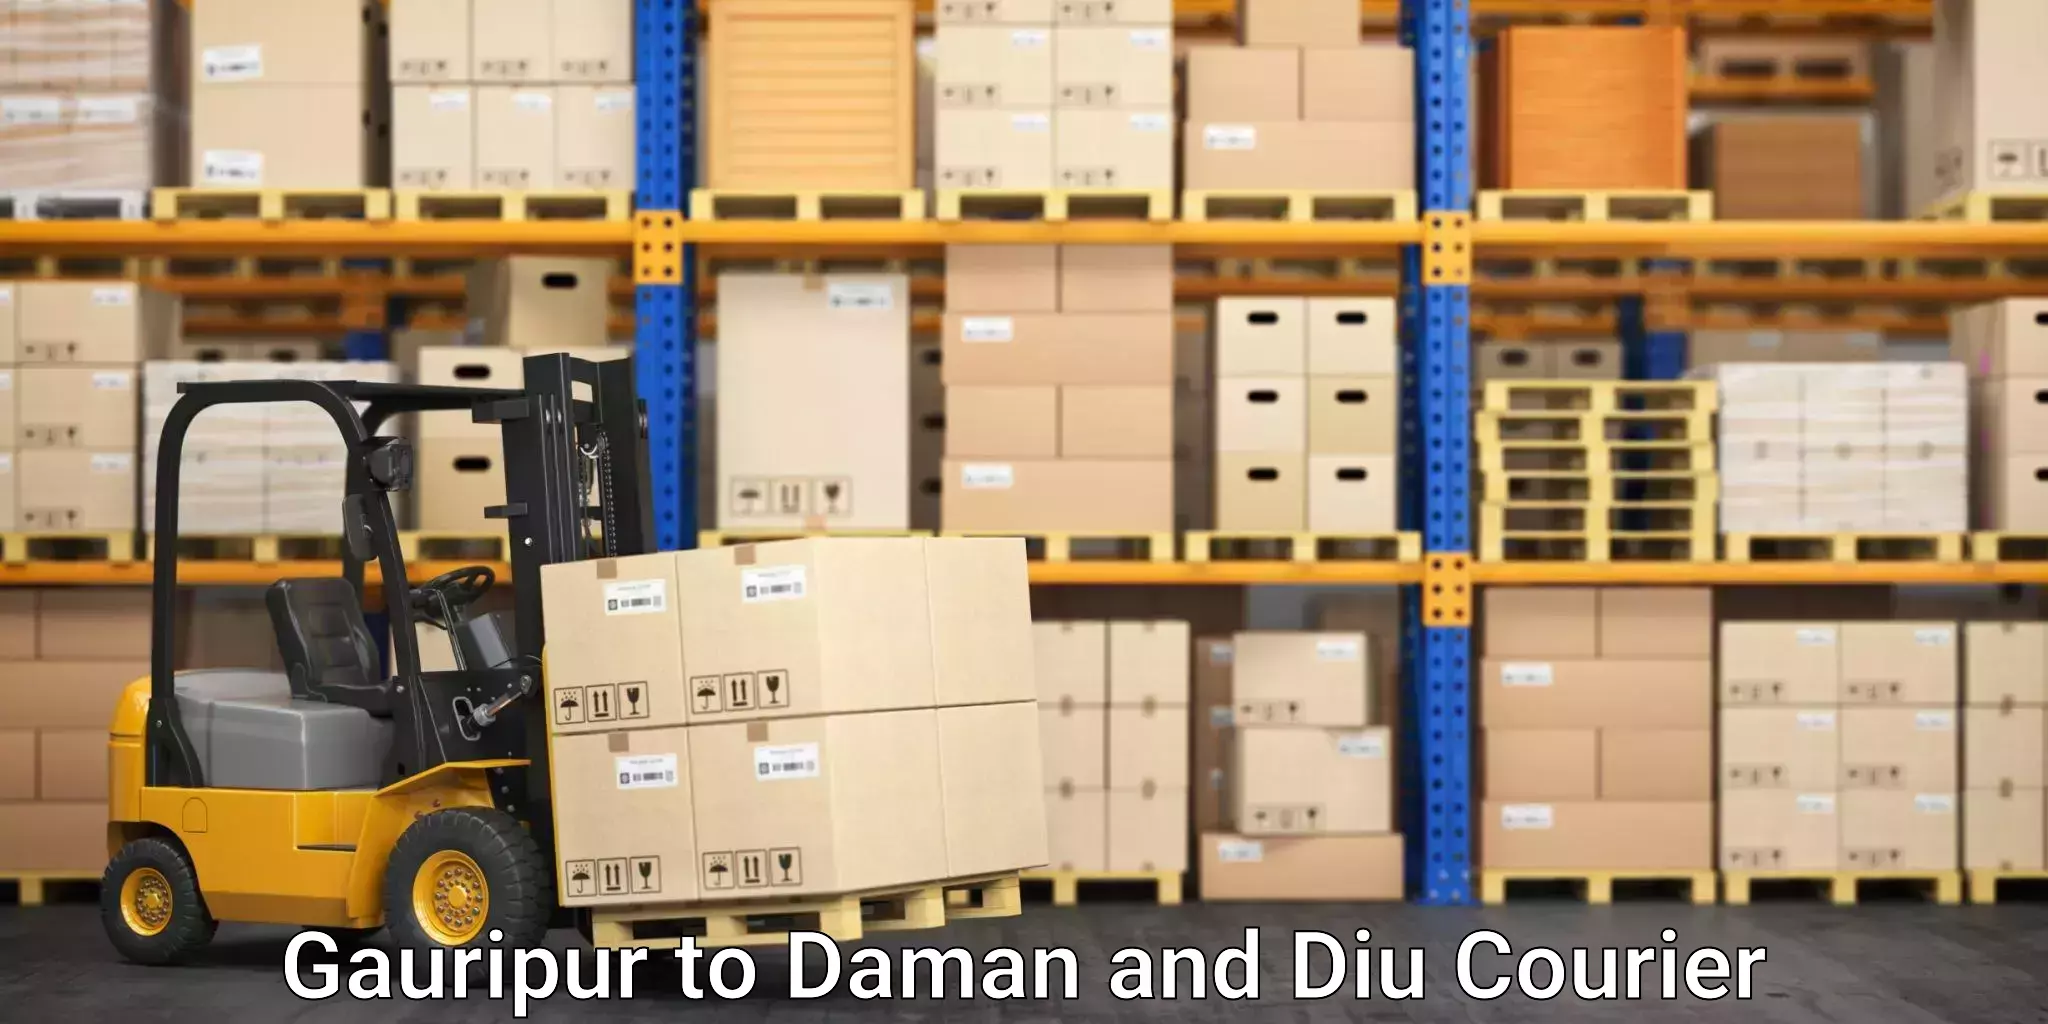 Furniture transport and logistics in Gauripur to Daman and Diu